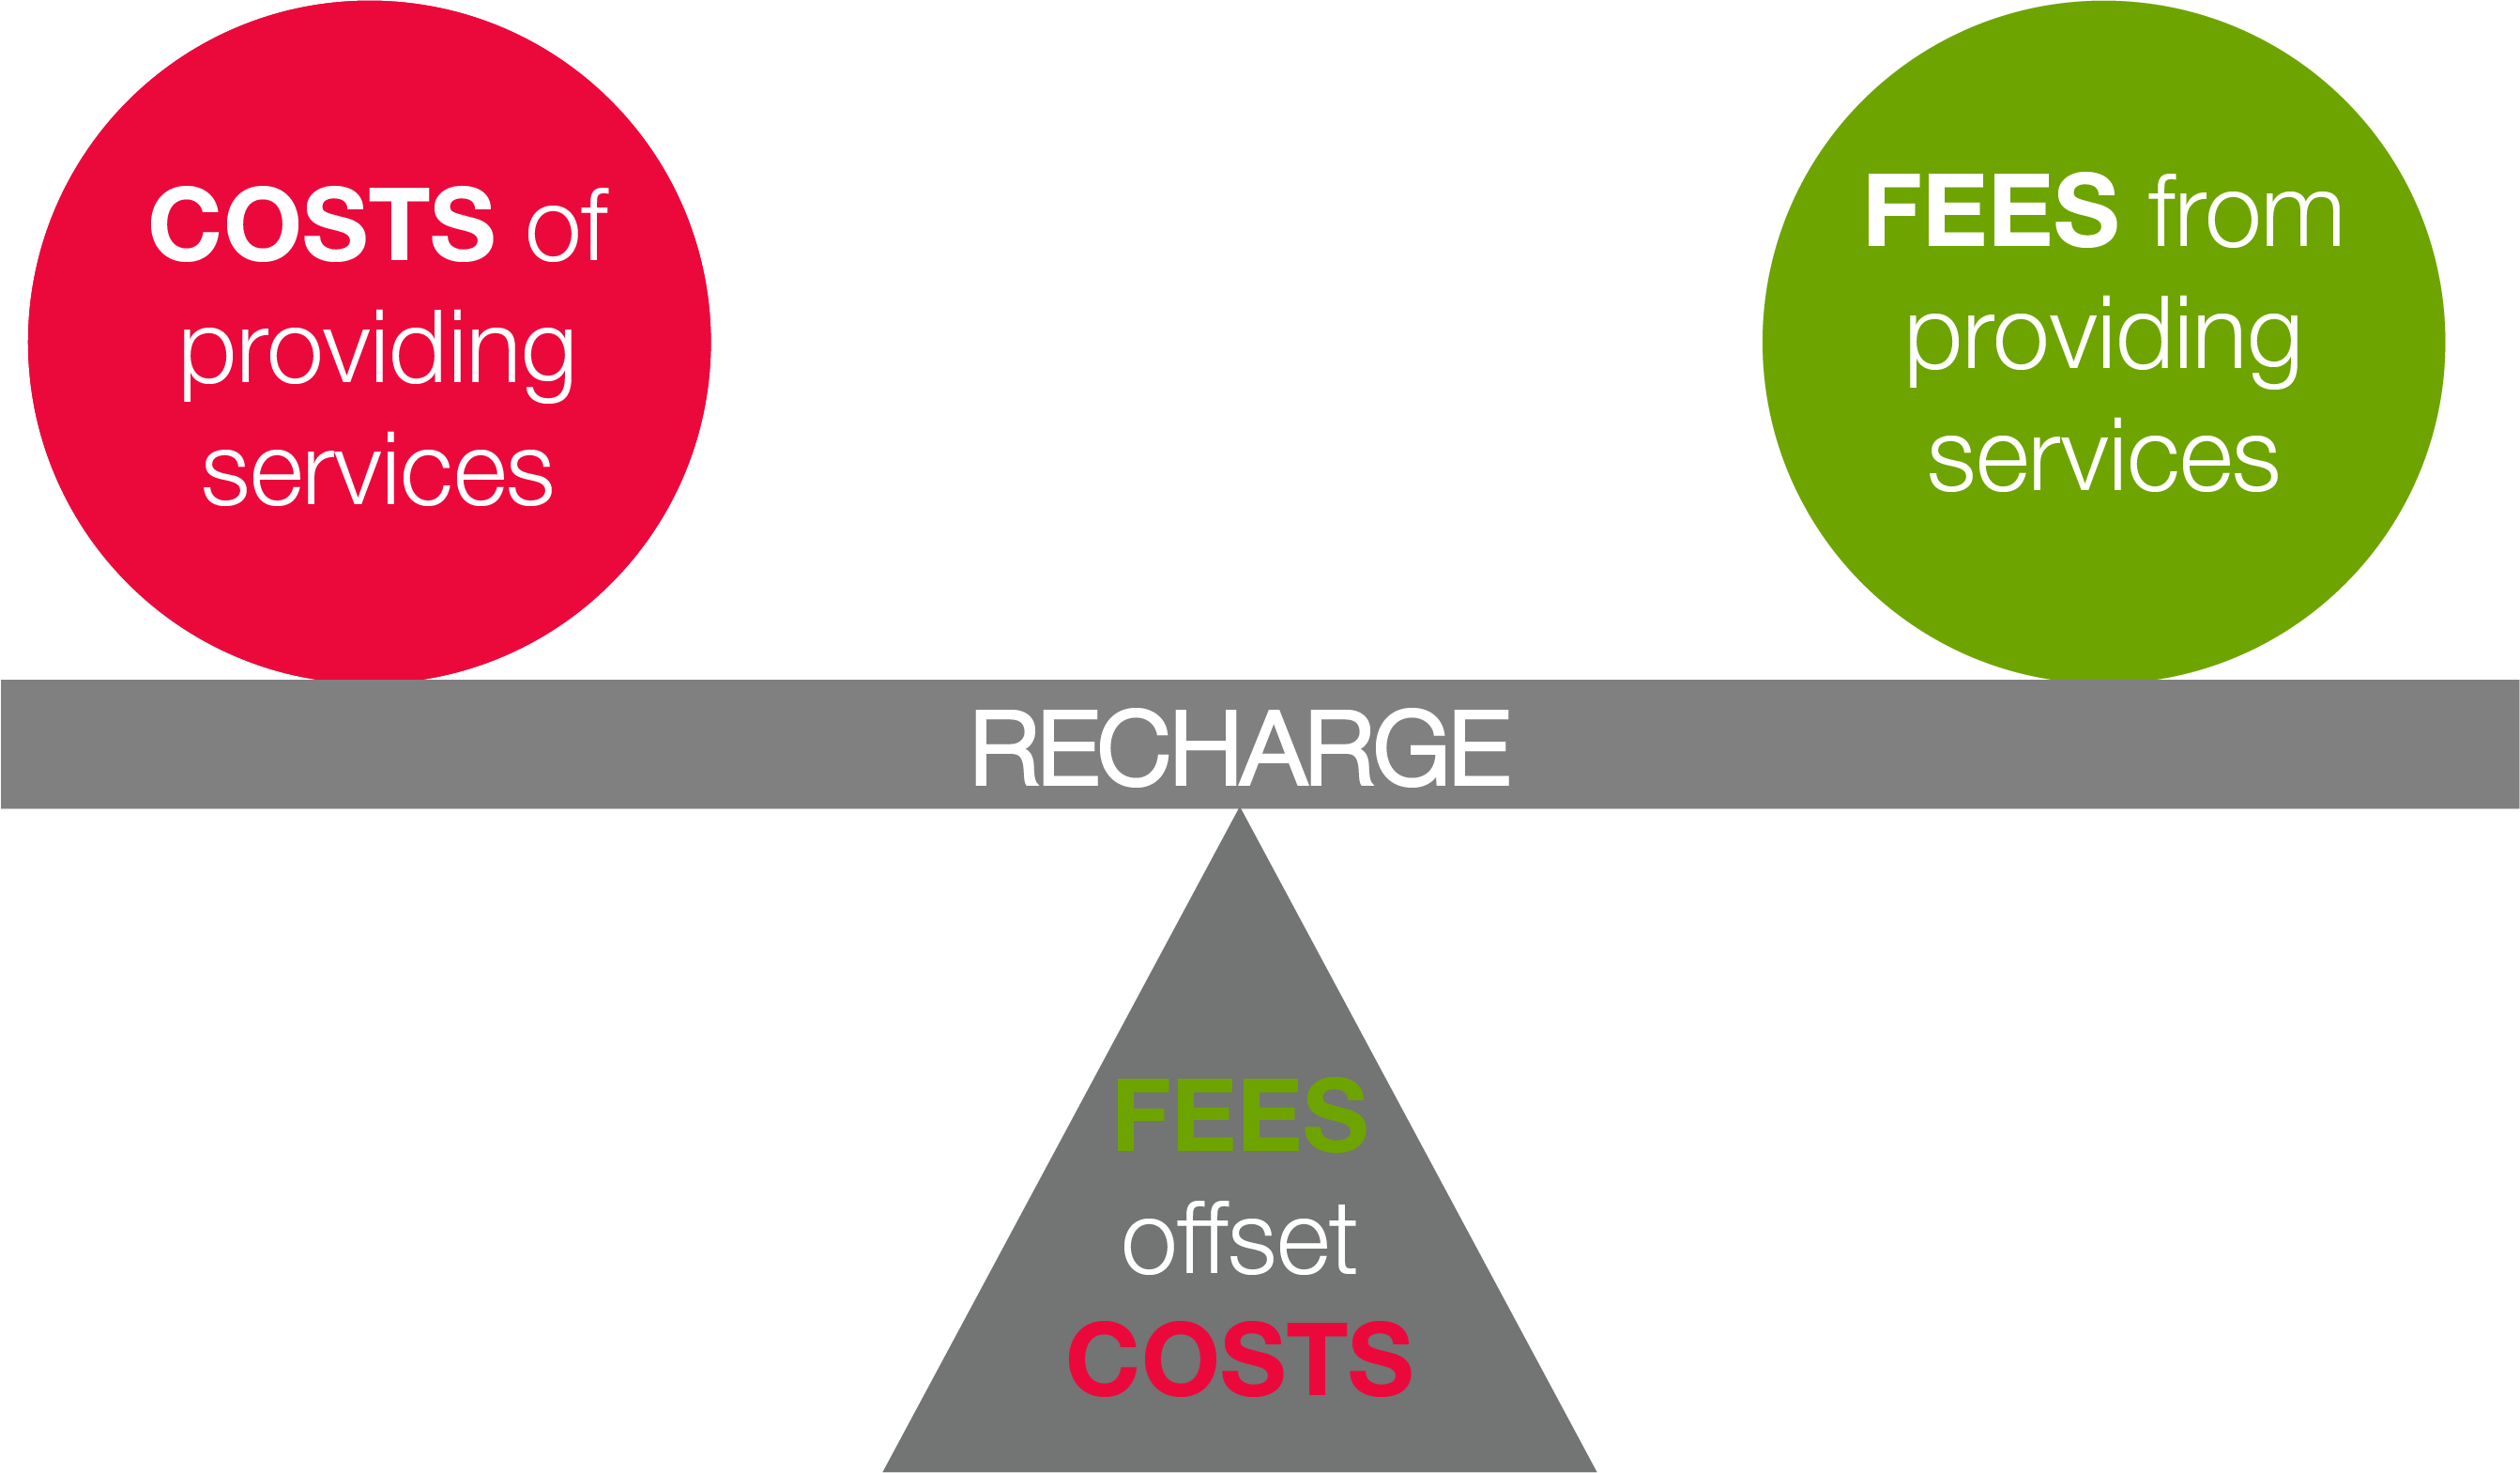 Image describes what a recharge is: A recharge is an internal charging mechanism where the costs of  providing products or services are recovered by charging fees based on an approved recharge rate.